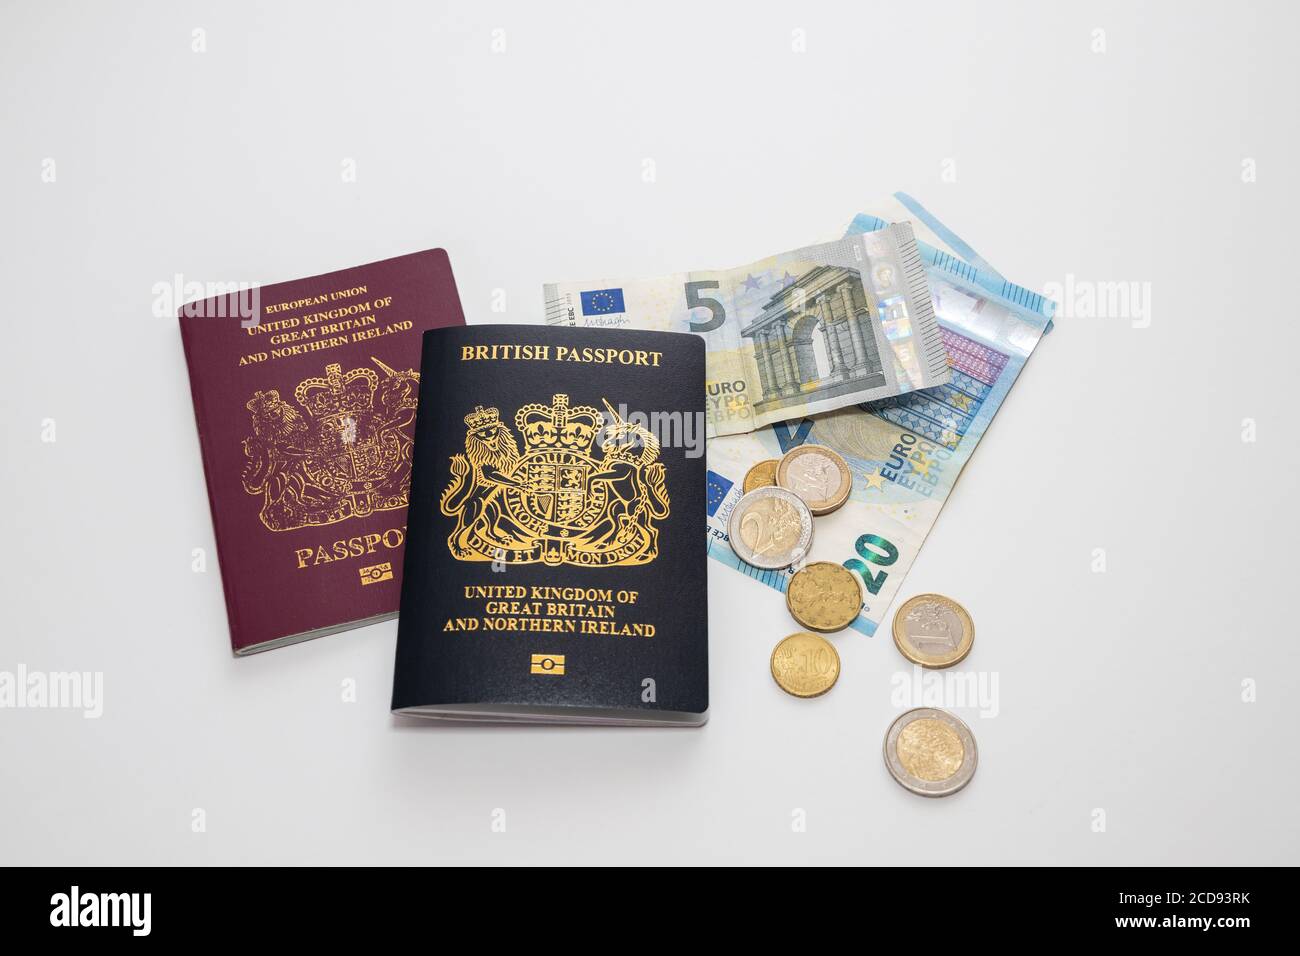 New blue British passport. (United Kingdom of Great Britain and Ireland) for post-Brexit and old EU passport, together on a plain background Stock Photo